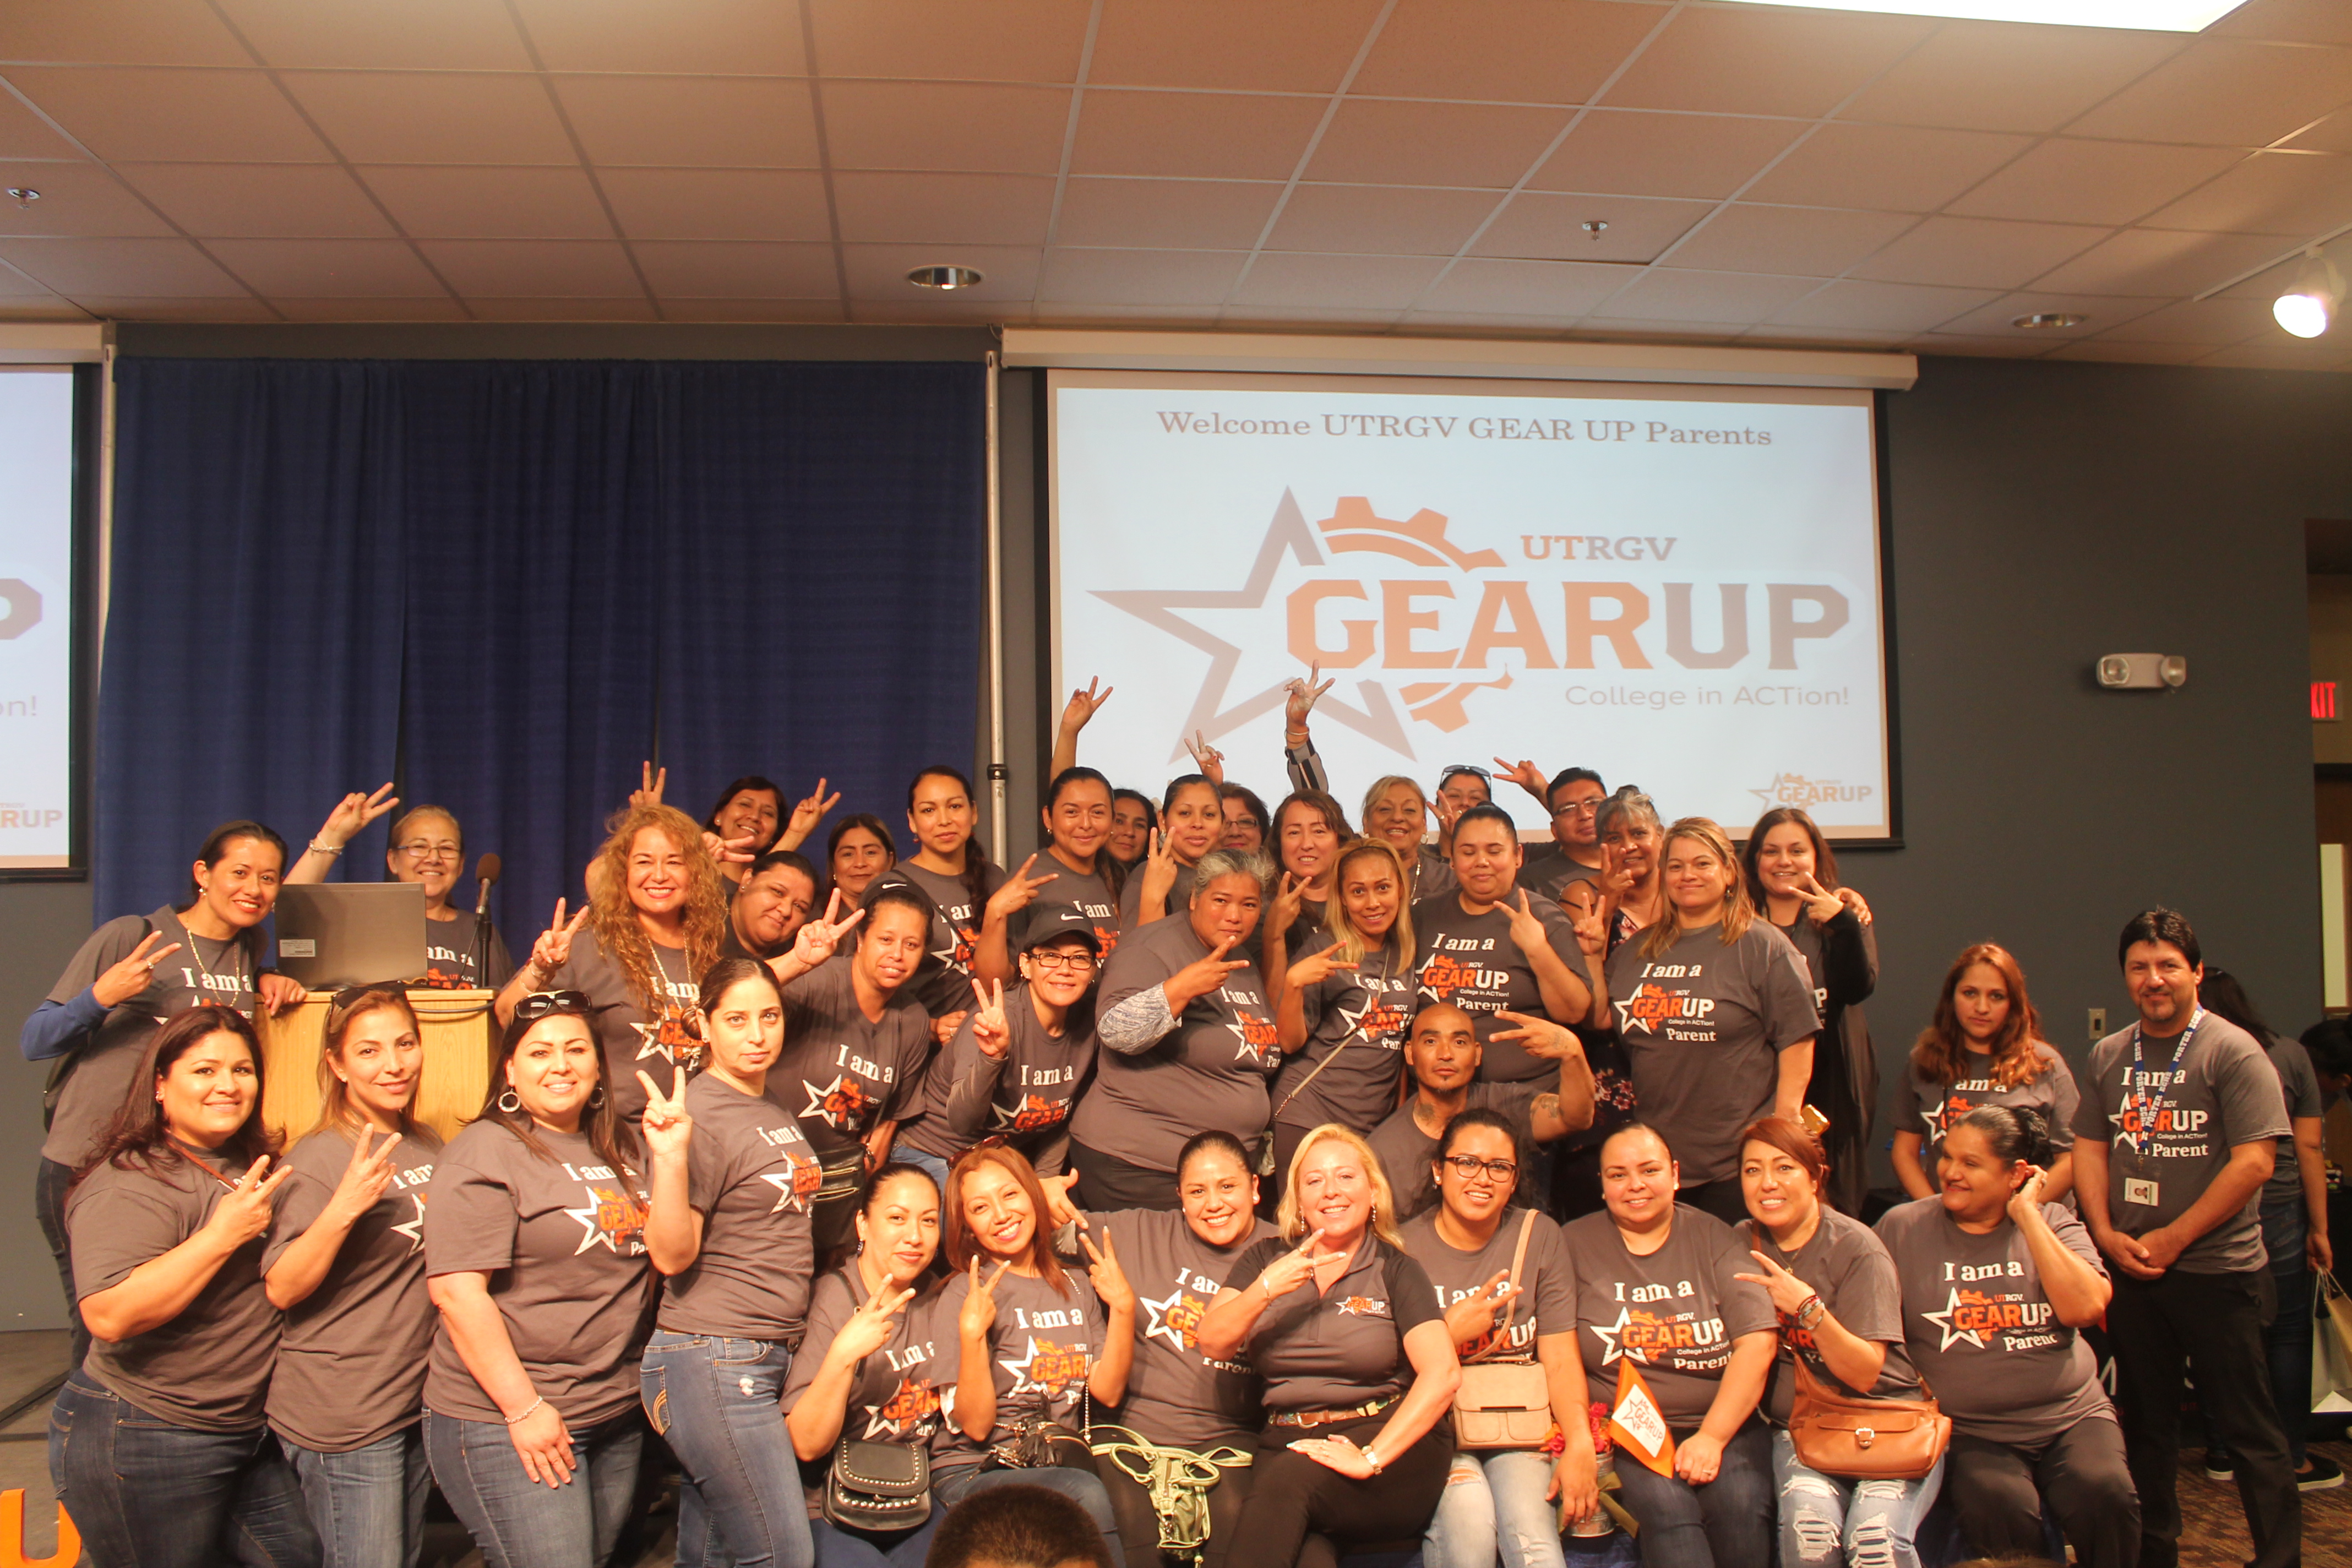 GEAR UP College in ACTion!